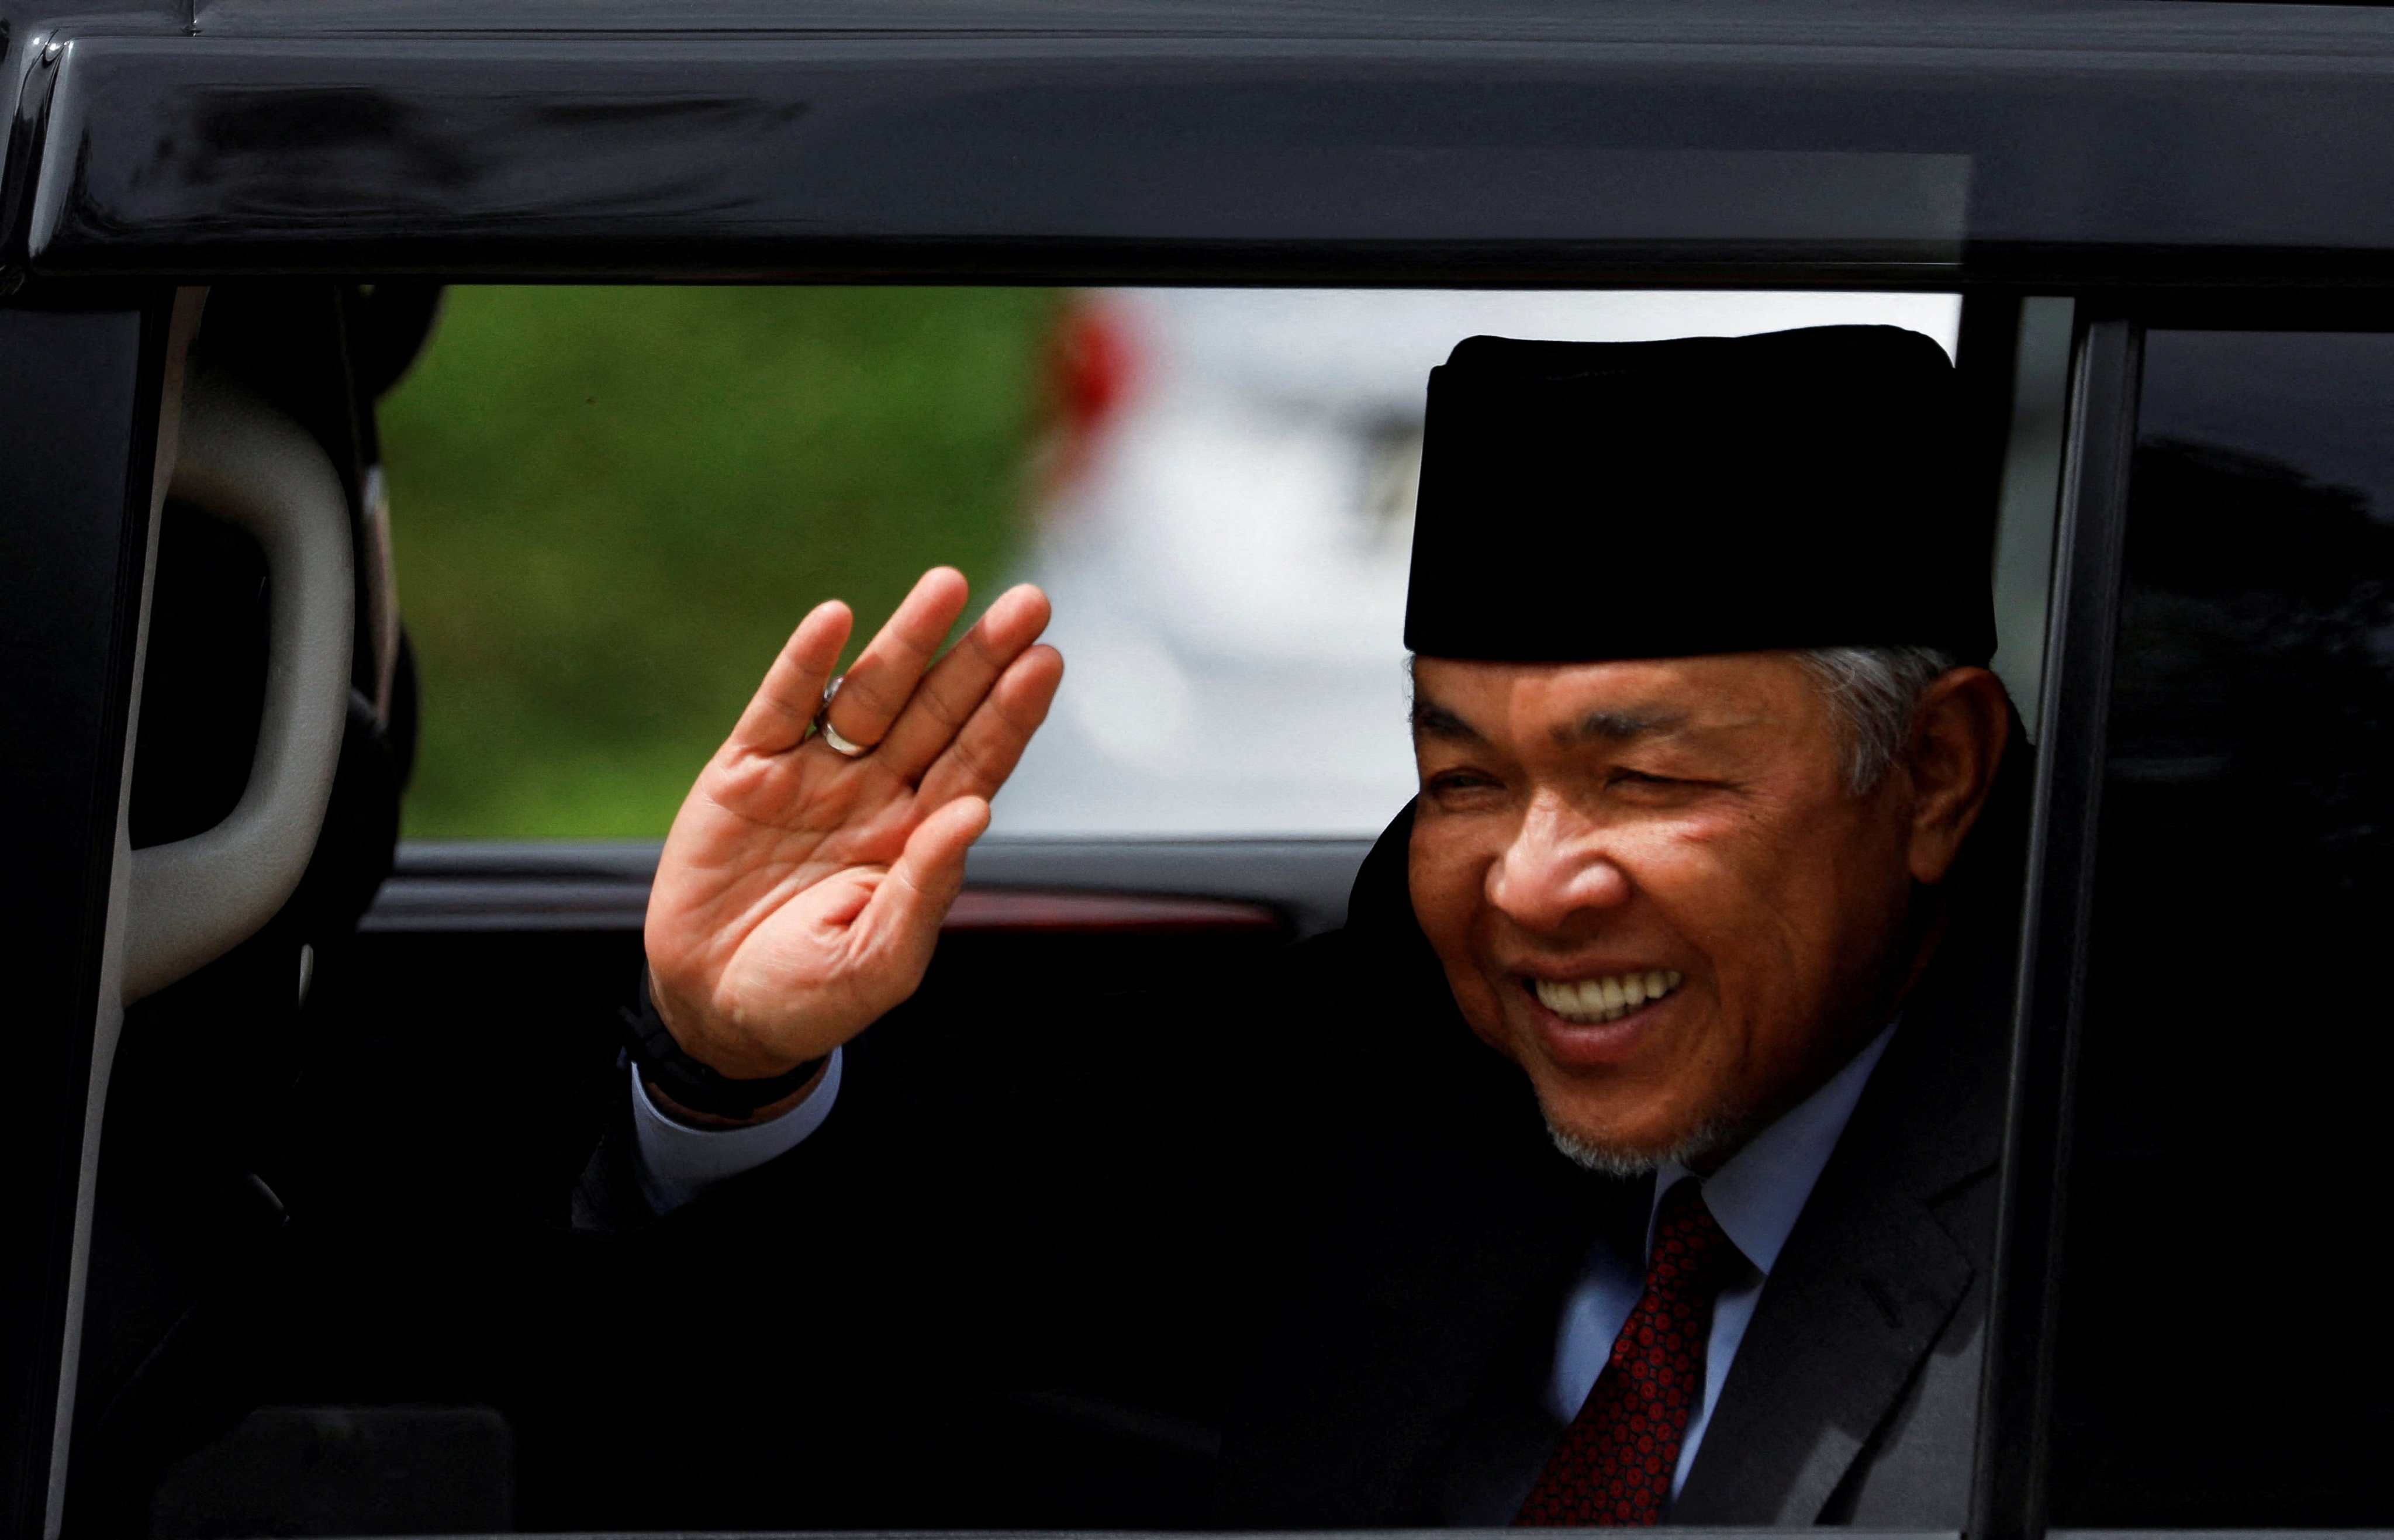 Umno leader Ahmad Zahid Hamidi has been urged to resign amid calls for urgent reforms within the party. Photo: Reuters